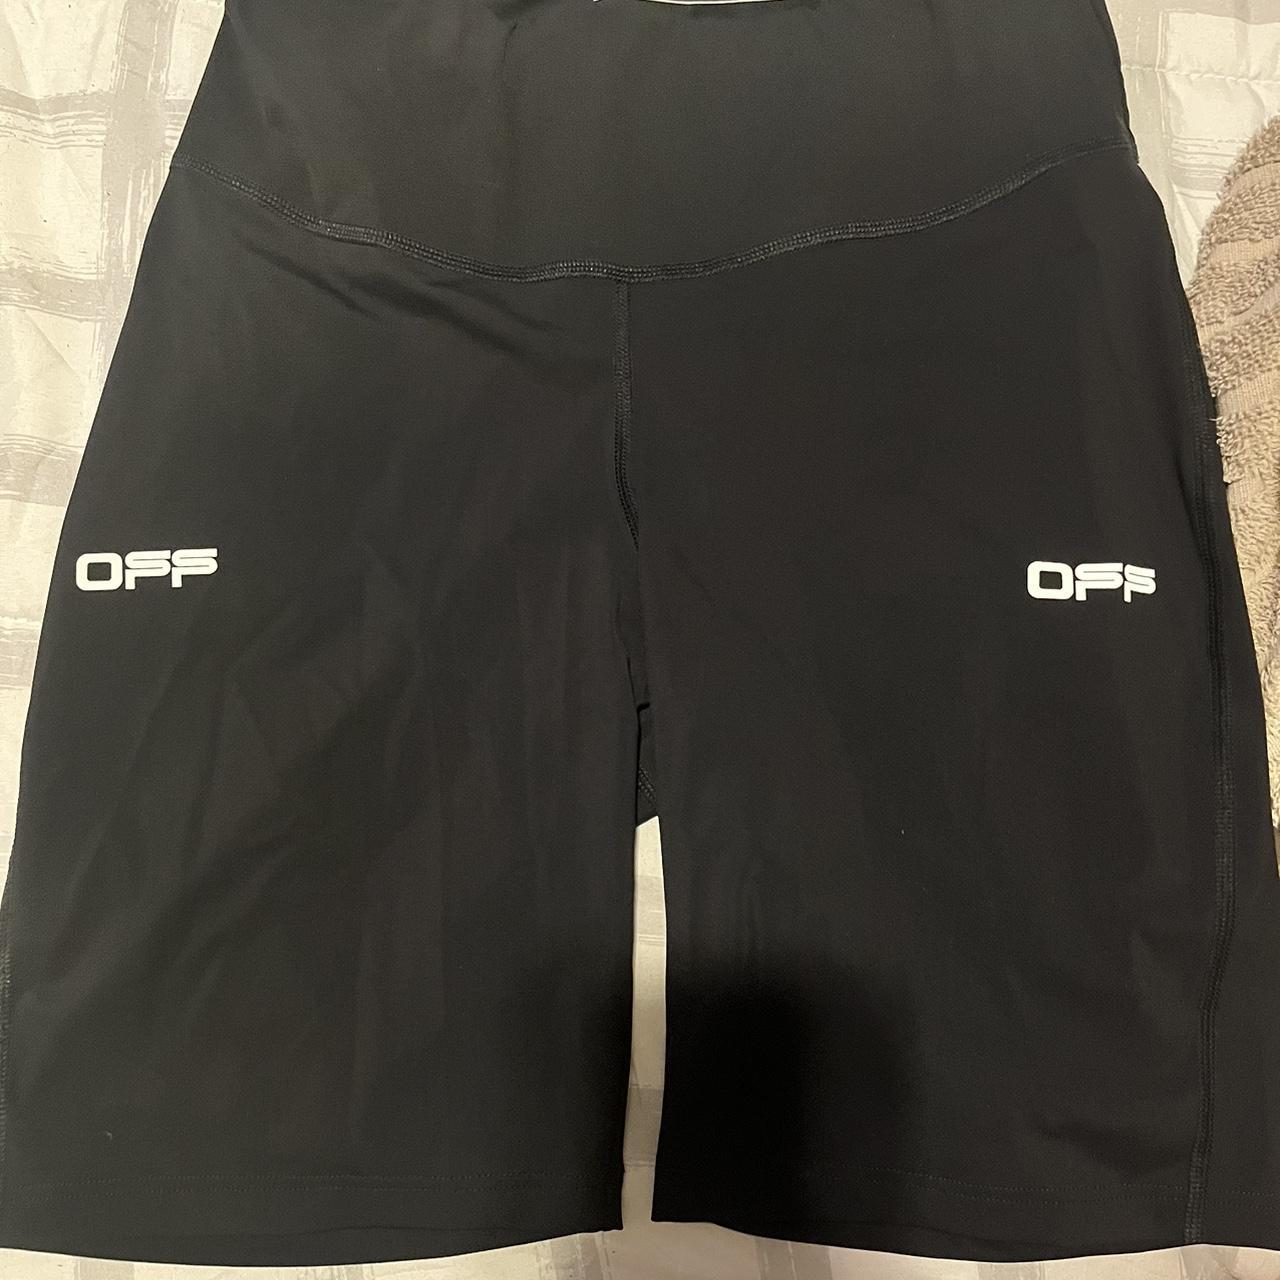 OFF WHITE WOMENS BEST WORKOUT SHORTS / GYM - Depop